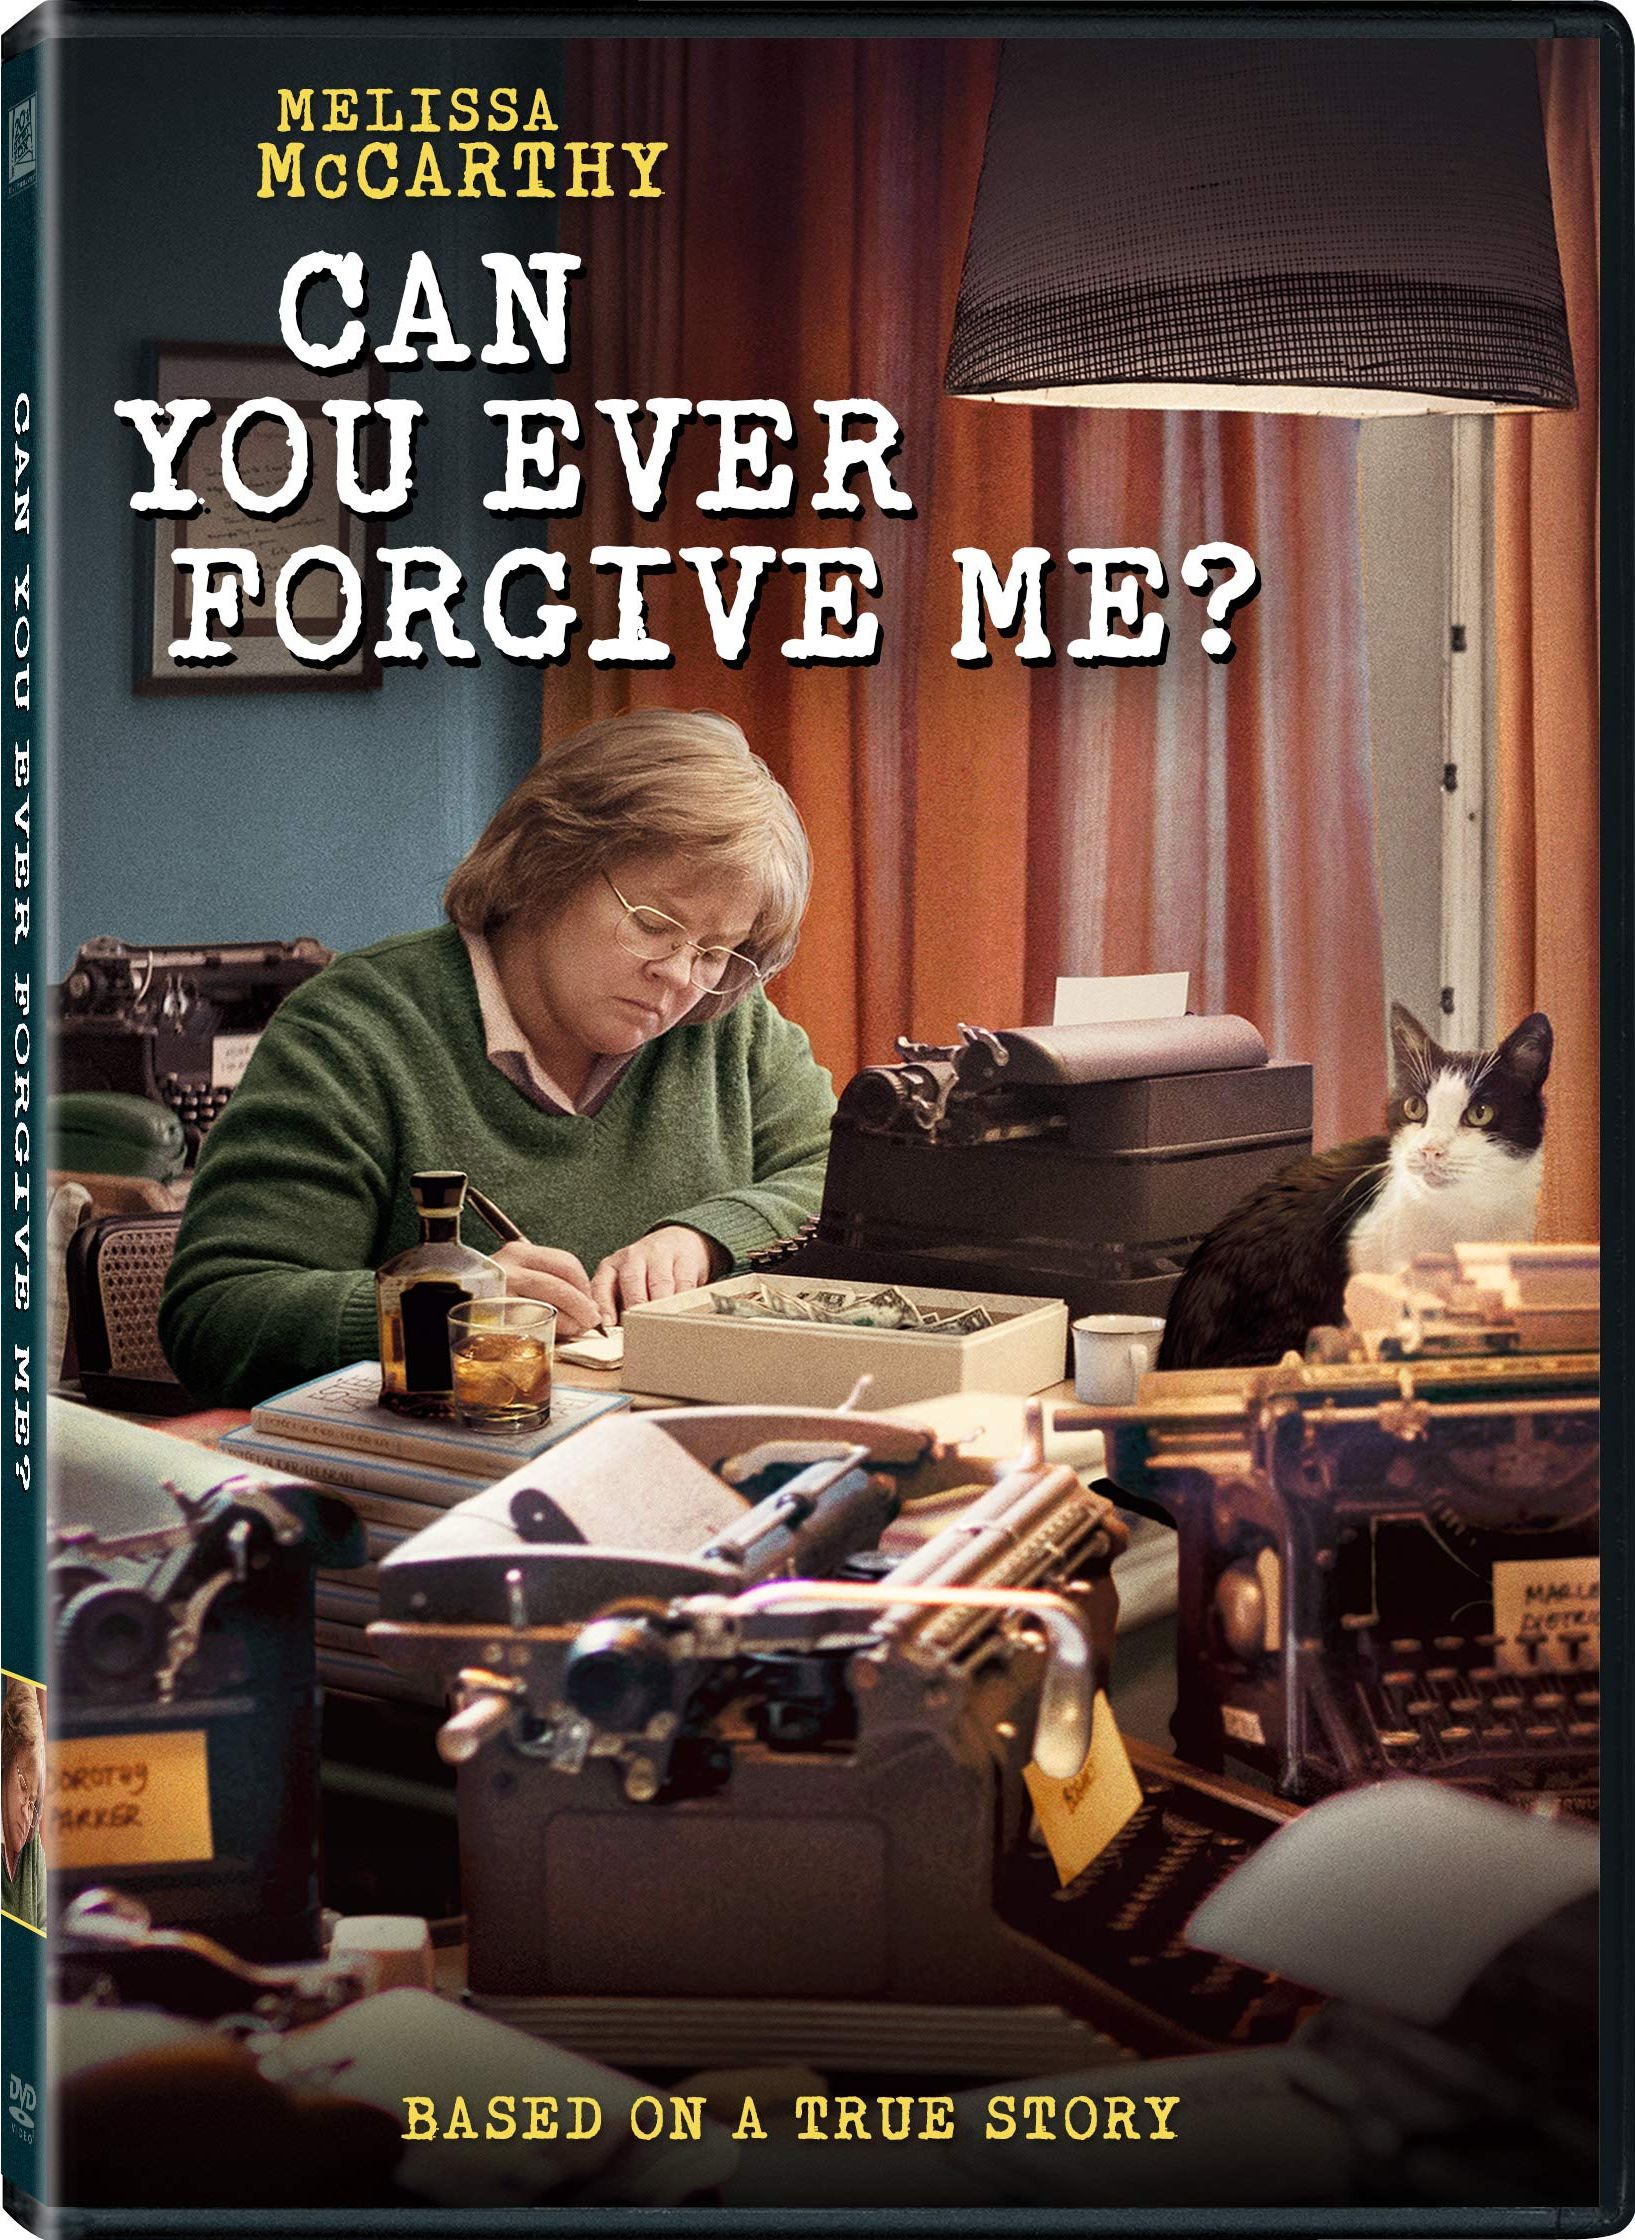 Can You Ever Me? DVD Release Date February 19, 2019